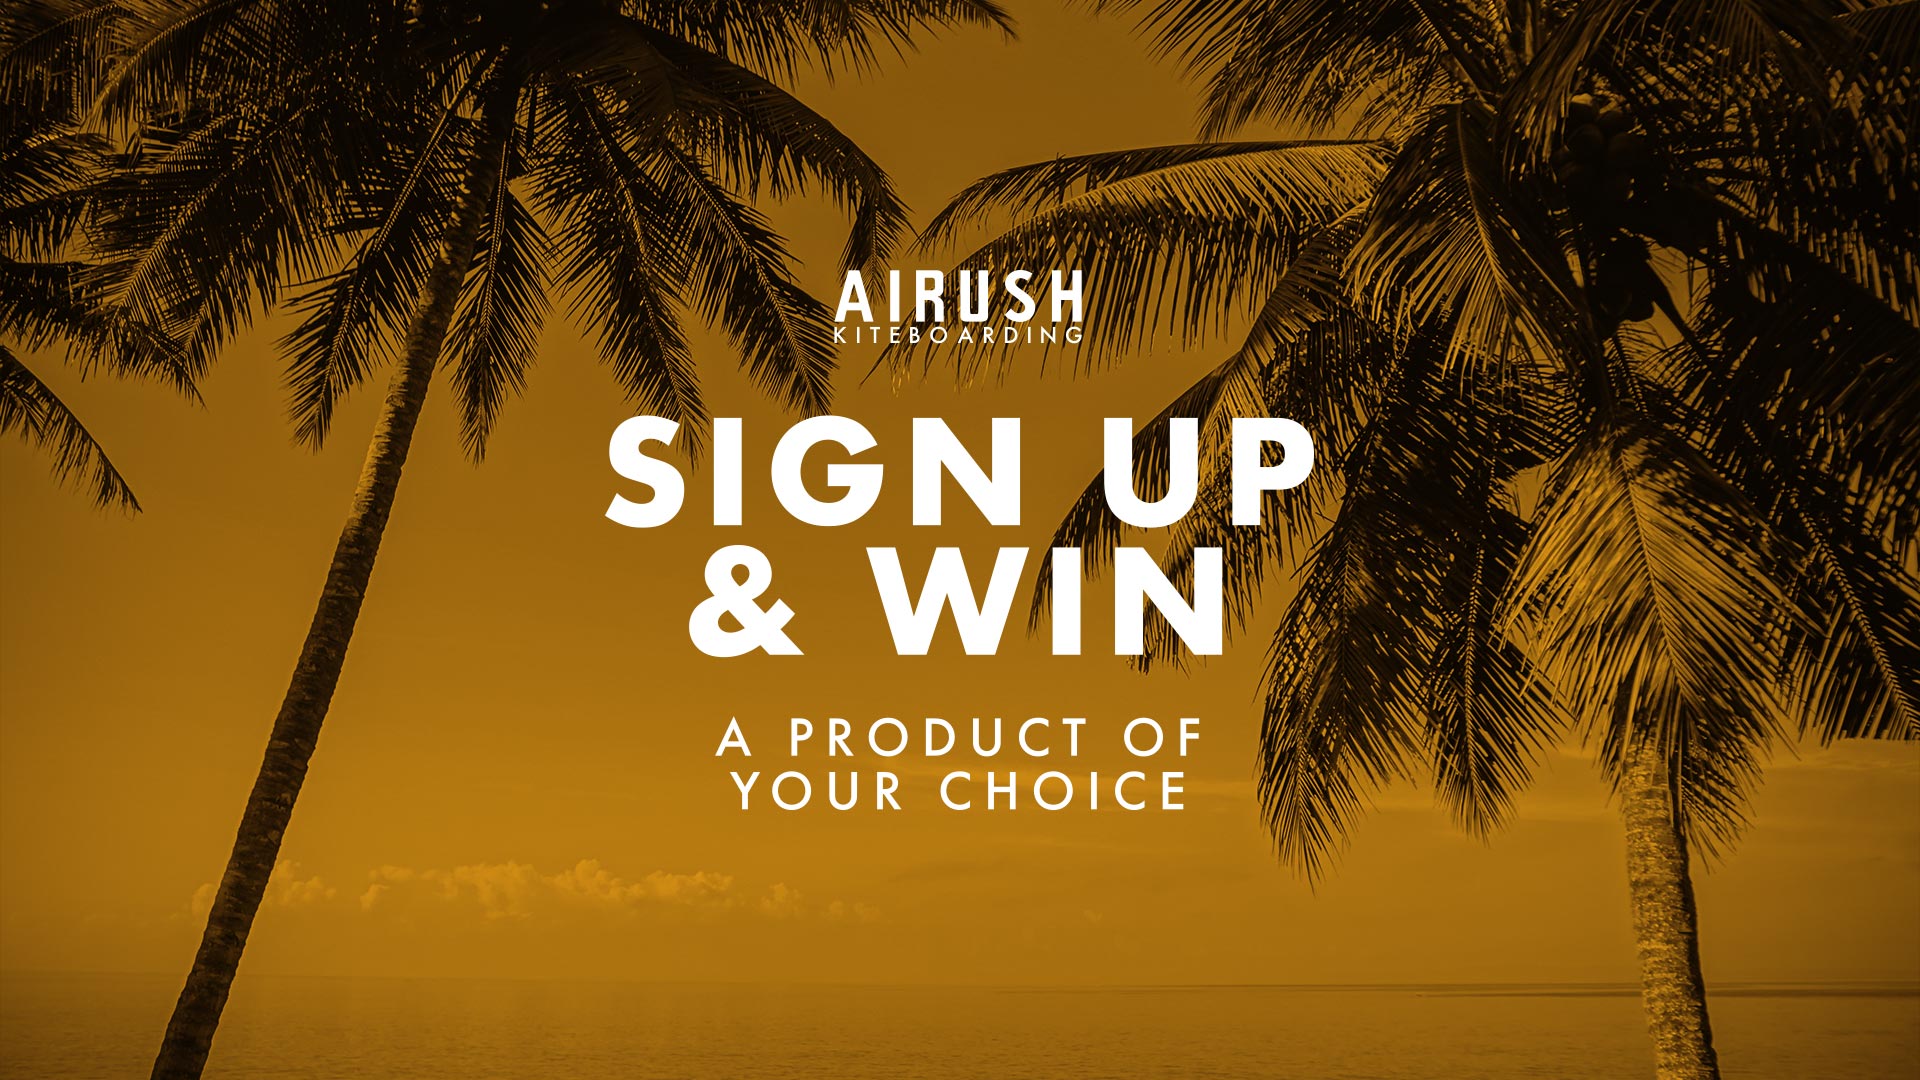 airush-22_Airush_Freeride-Campaign_Home-Page-Slider_Sign-Up-1Sign Up & WinNews